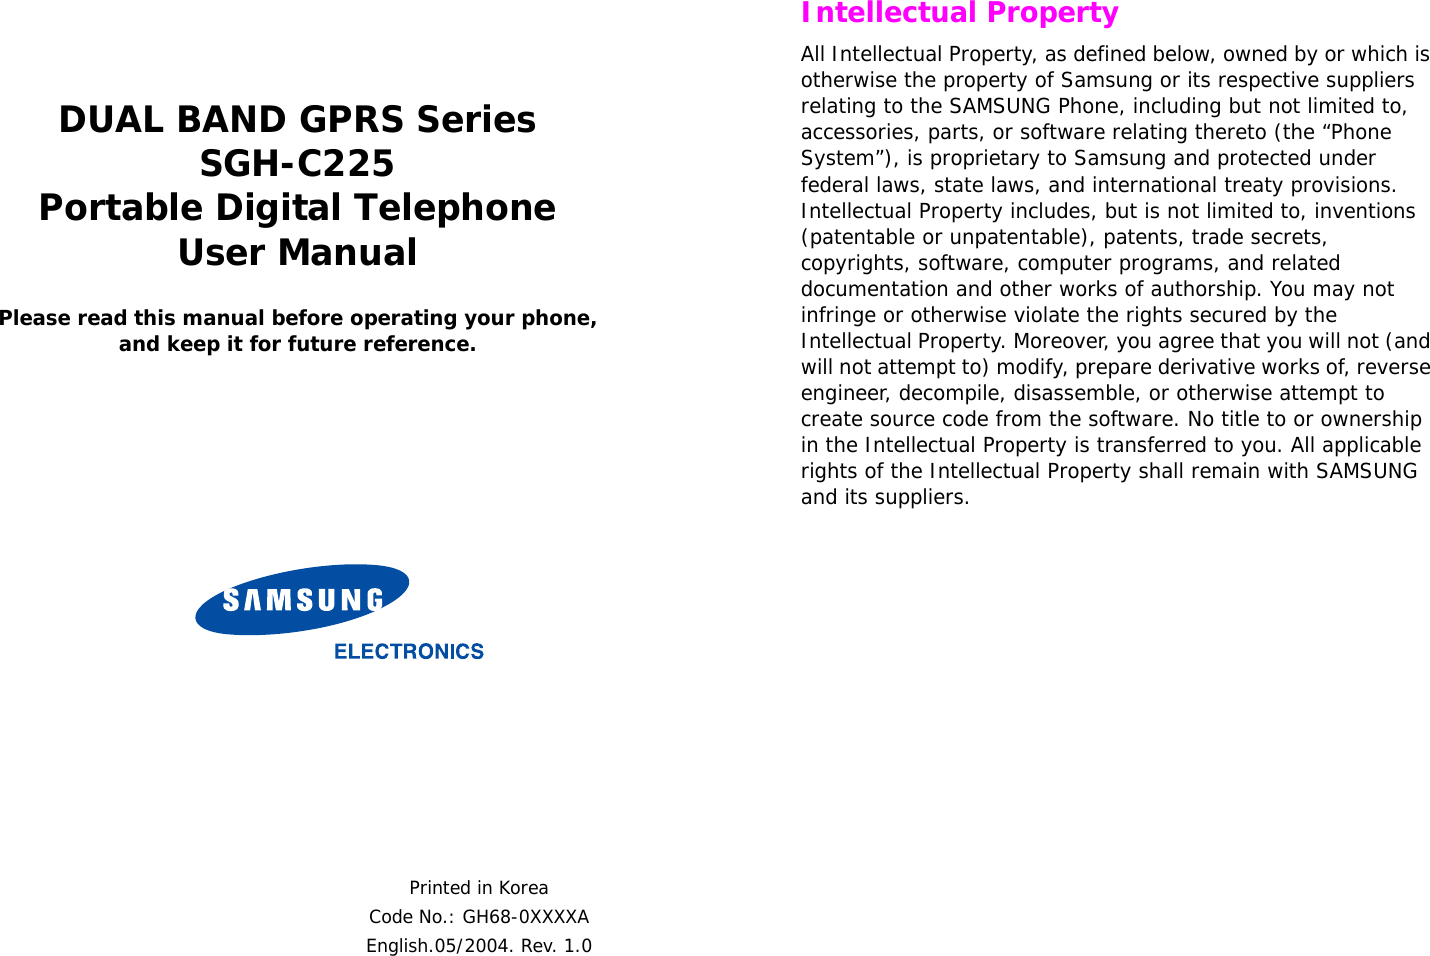  DUAL BAND GPRS SeriesSGH-C225Portable Digital TelephoneUser ManualPlease read this manual before operating your phone, and keep it for future reference.Printed in KoreaCode No.: GH68-0XXXXAEnglish.05/2004. Rev. 1.0 Intellectual PropertyAll Intellectual Property, as defined below, owned by or which is otherwise the property of Samsung or its respective suppliers relating to the SAMSUNG Phone, including but not limited to, accessories, parts, or software relating thereto (the “Phone System”), is proprietary to Samsung and protected under federal laws, state laws, and international treaty provisions. Intellectual Property includes, but is not limited to, inventions (patentable or unpatentable), patents, trade secrets, copyrights, software, computer programs, and related documentation and other works of authorship. You may not infringe or otherwise violate the rights secured by the Intellectual Property. Moreover, you agree that you will not (and will not attempt to) modify, prepare derivative works of, reverse engineer, decompile, disassemble, or otherwise attempt to create source code from the software. No title to or ownership in the Intellectual Property is transferred to you. All applicable rights of the Intellectual Property shall remain with SAMSUNG and its suppliers.